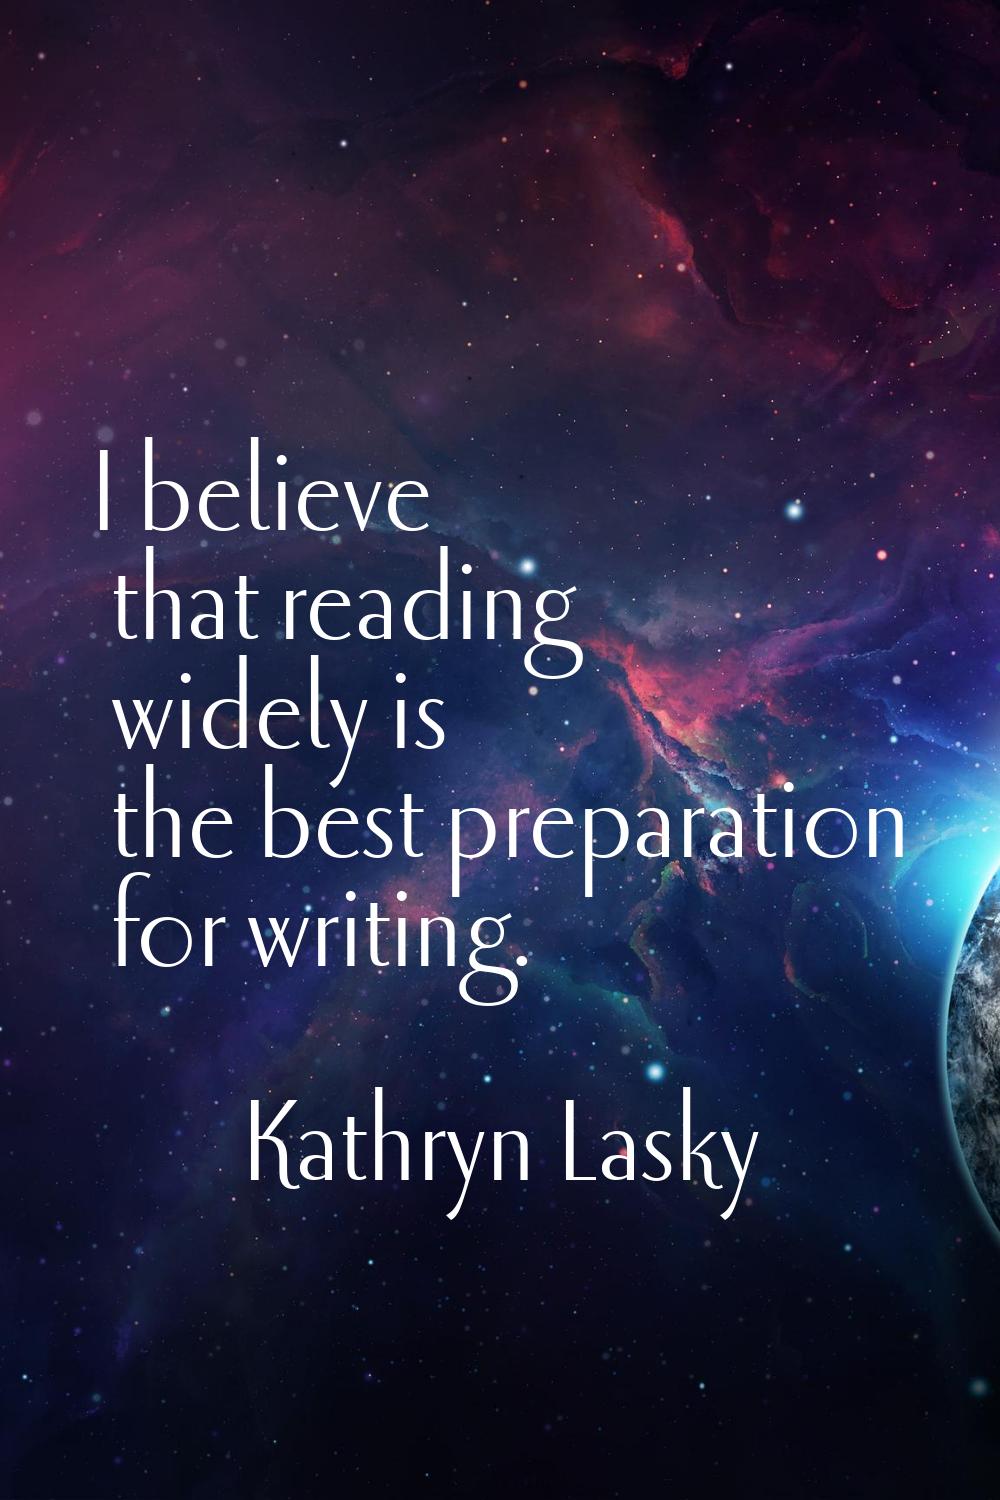 I believe that reading widely is the best preparation for writing.